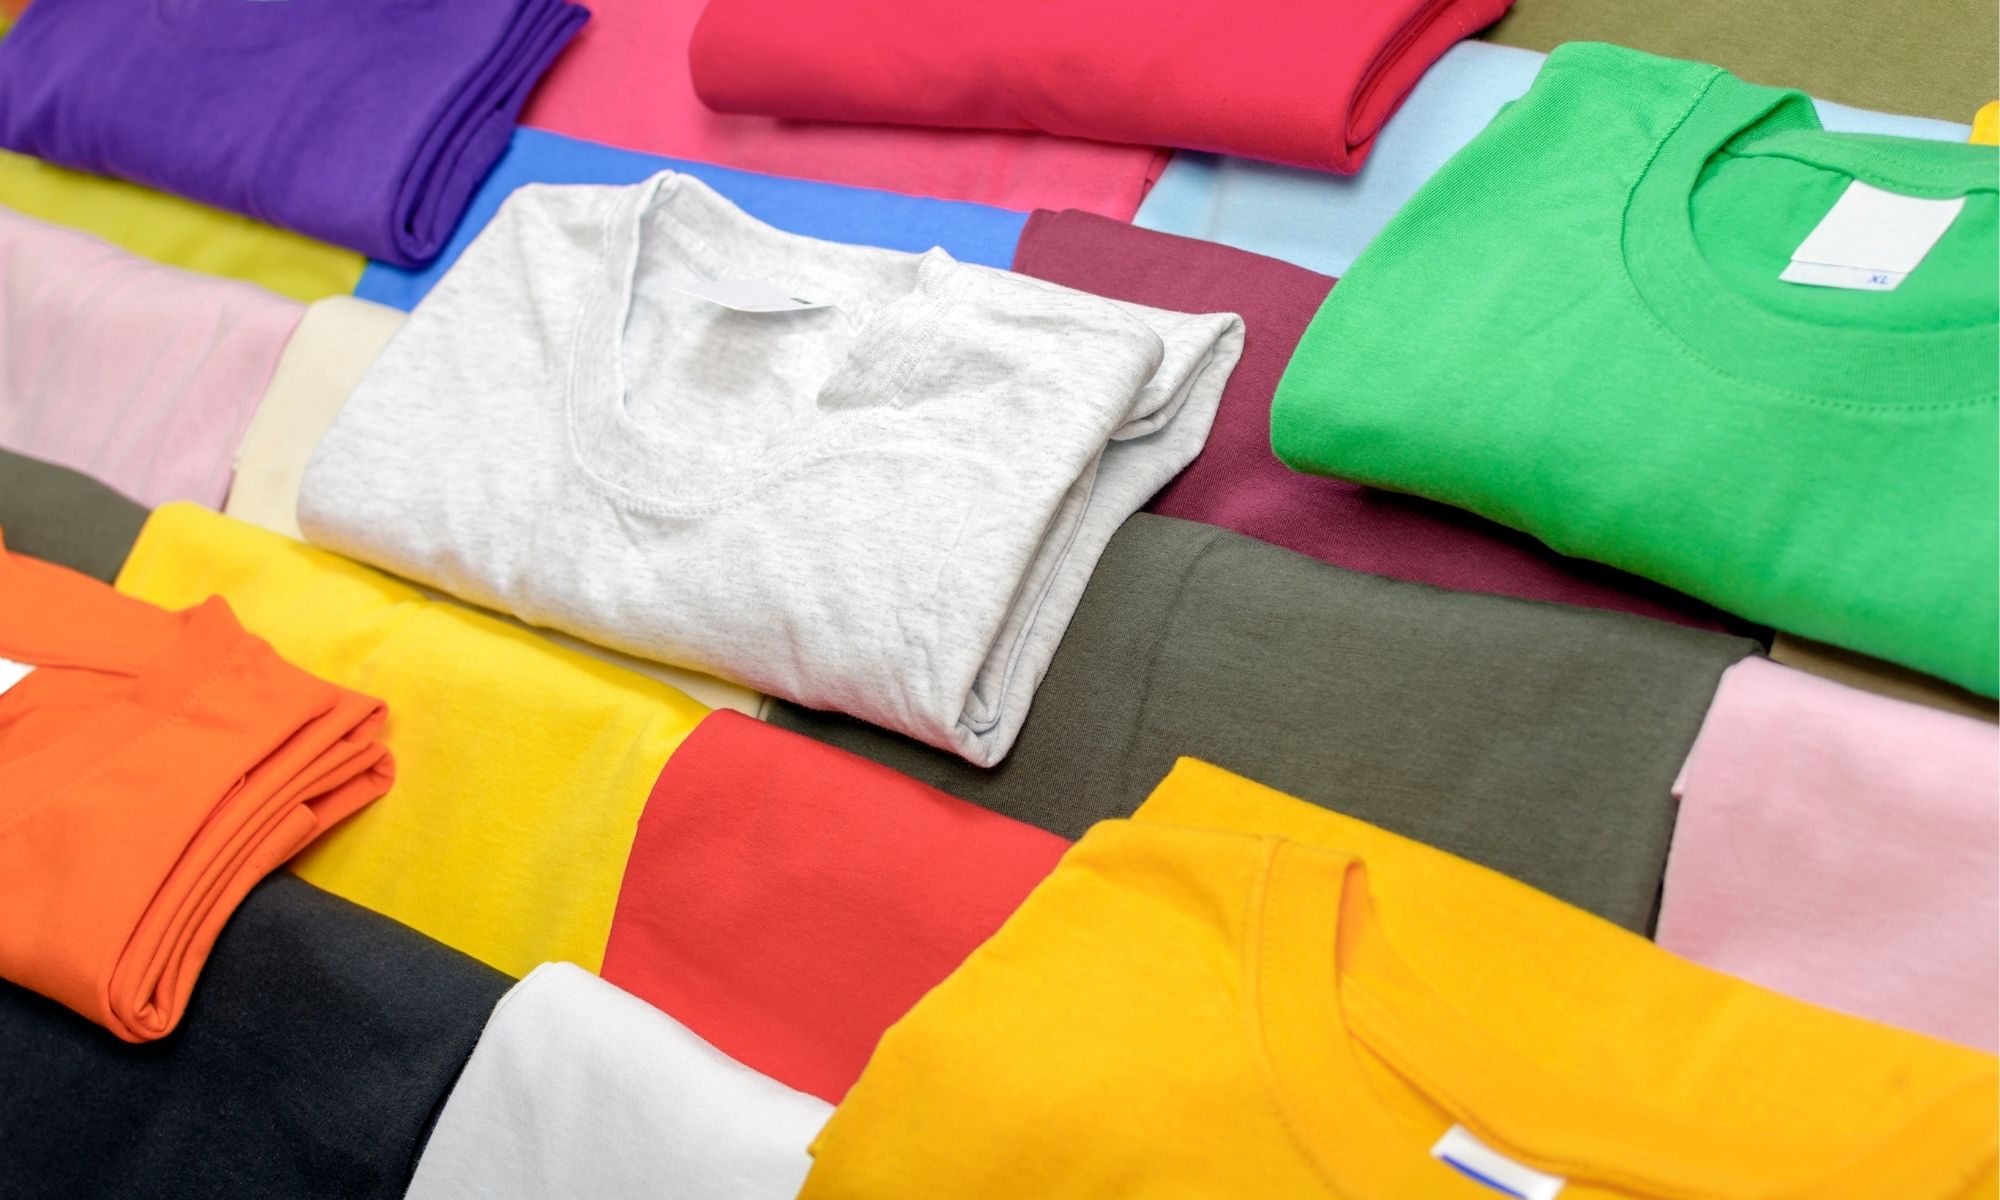 t-shirts can be Many Colours Like These Ones Folded Up. Create Your Own Shop and Sell t-shirts Online.